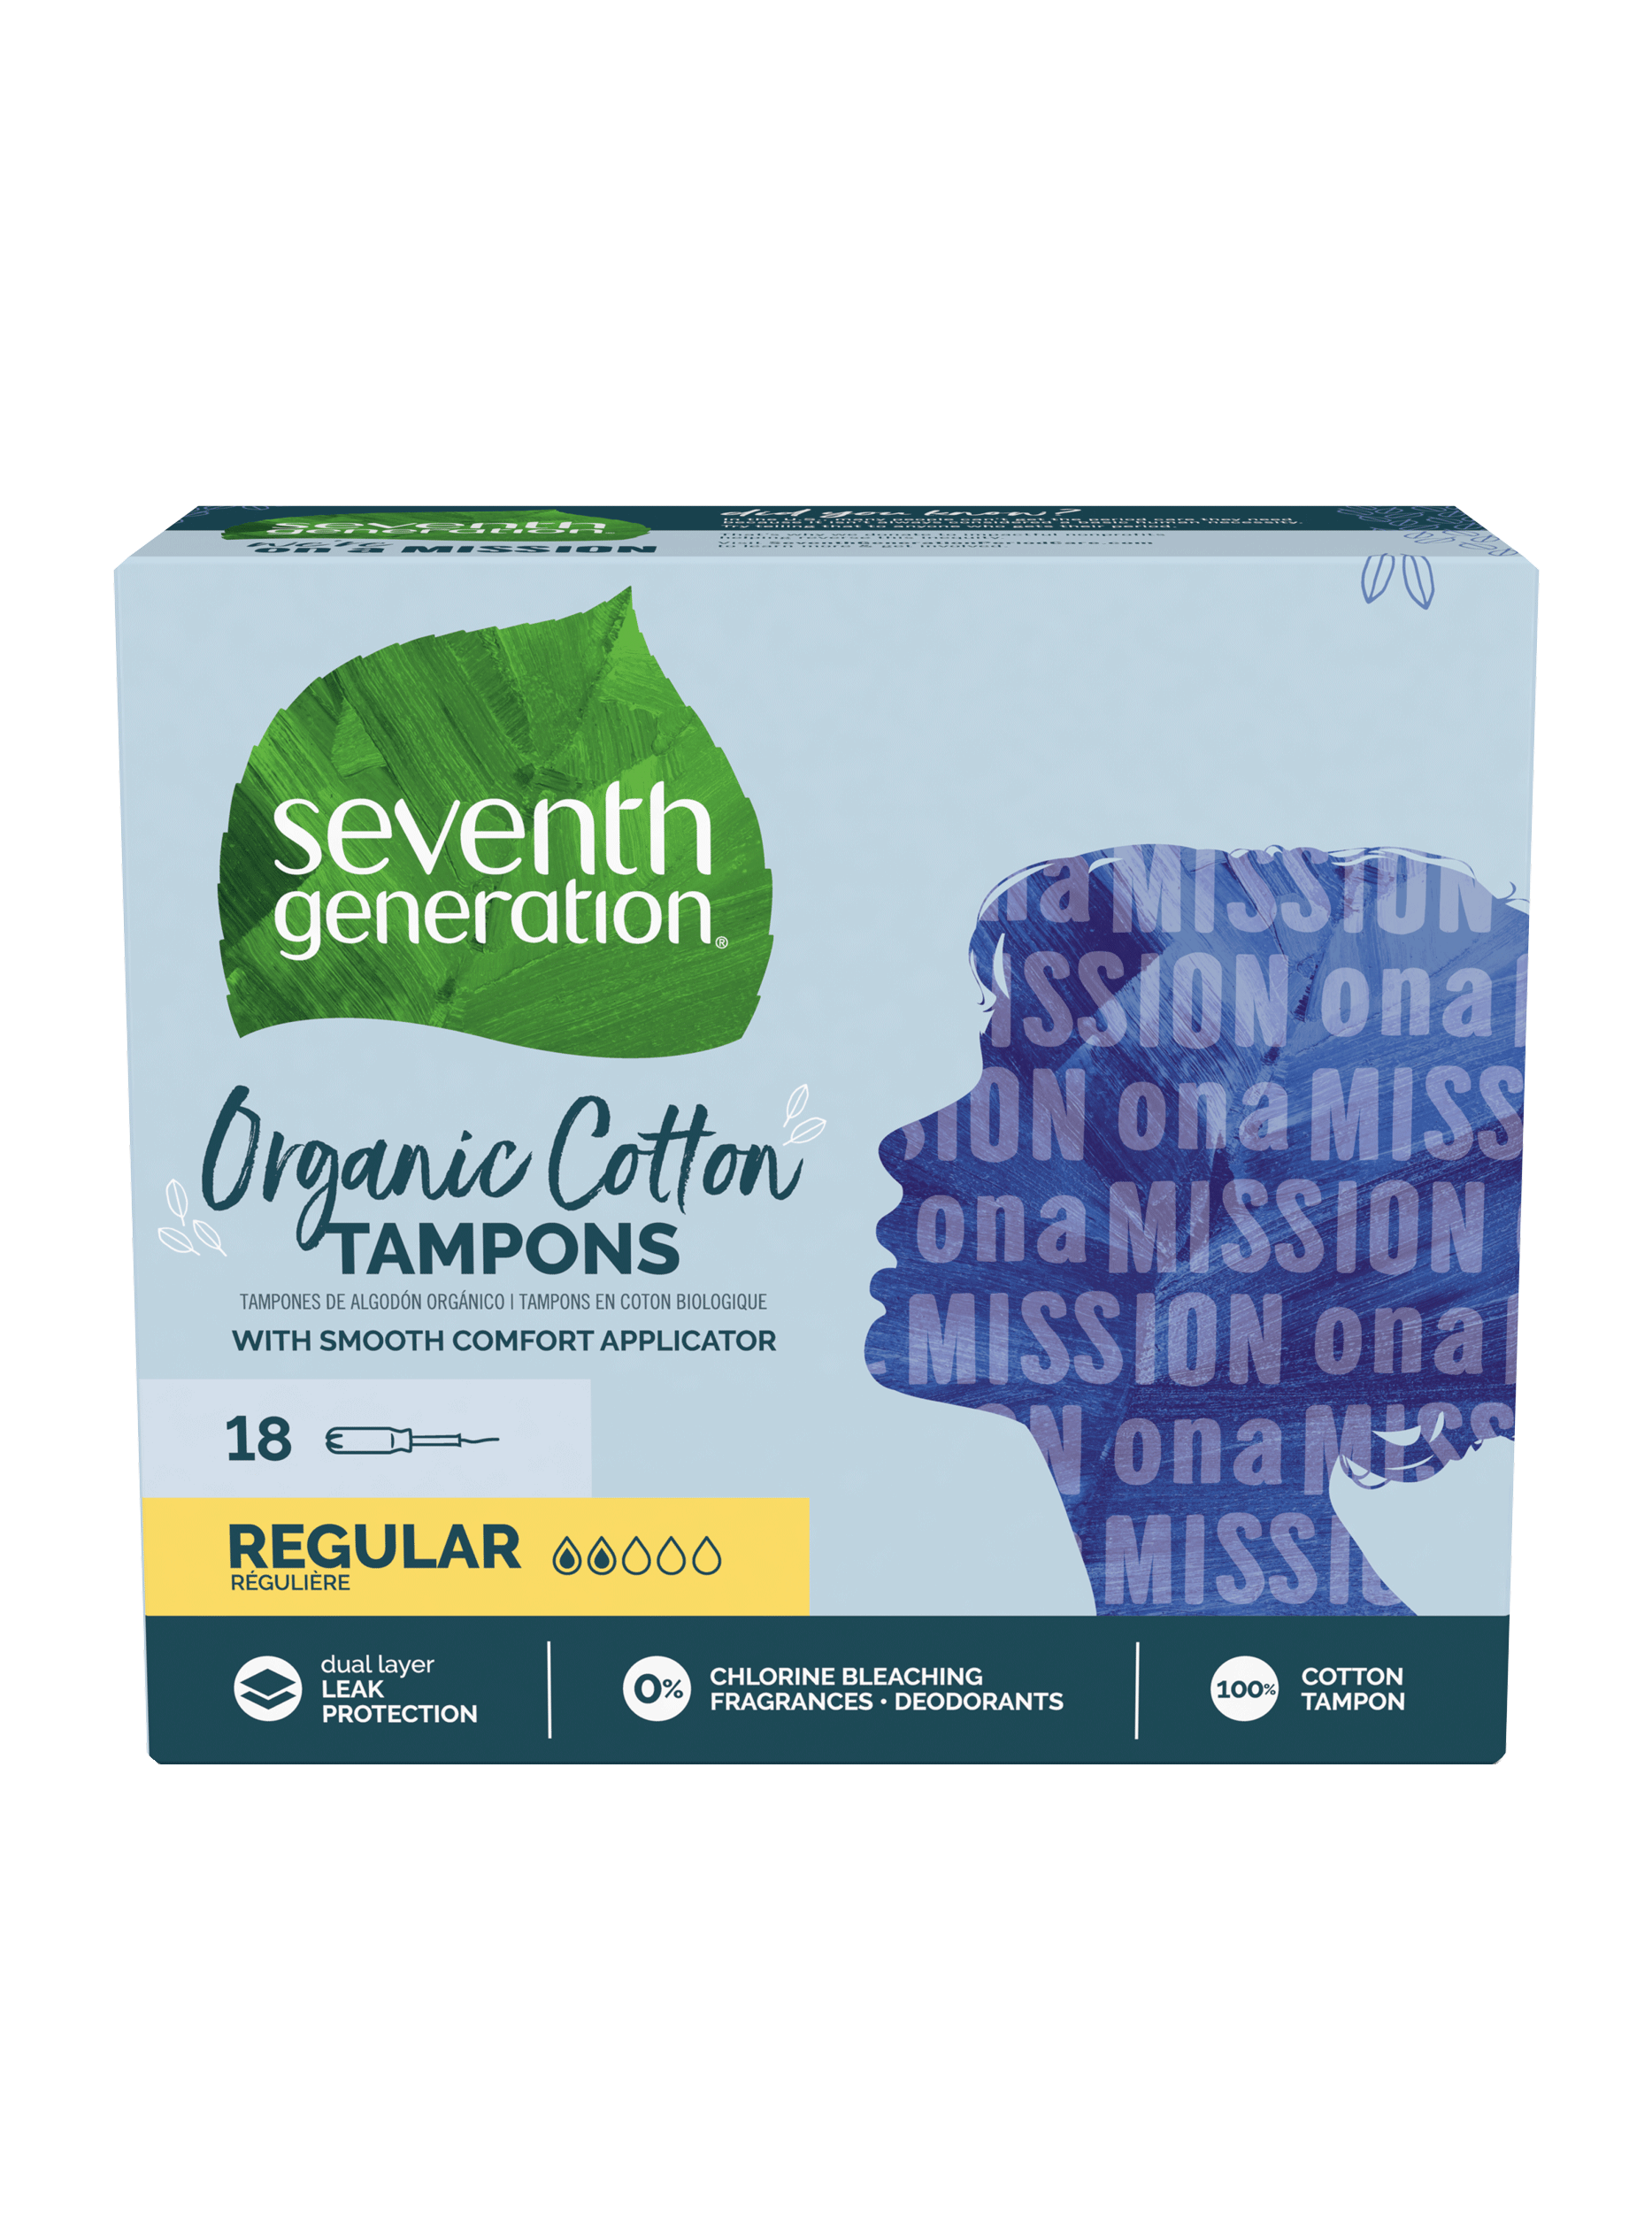 Organic Cotton Tampons. BEST ORGANIC TAMPON BRANDS IN INDIA